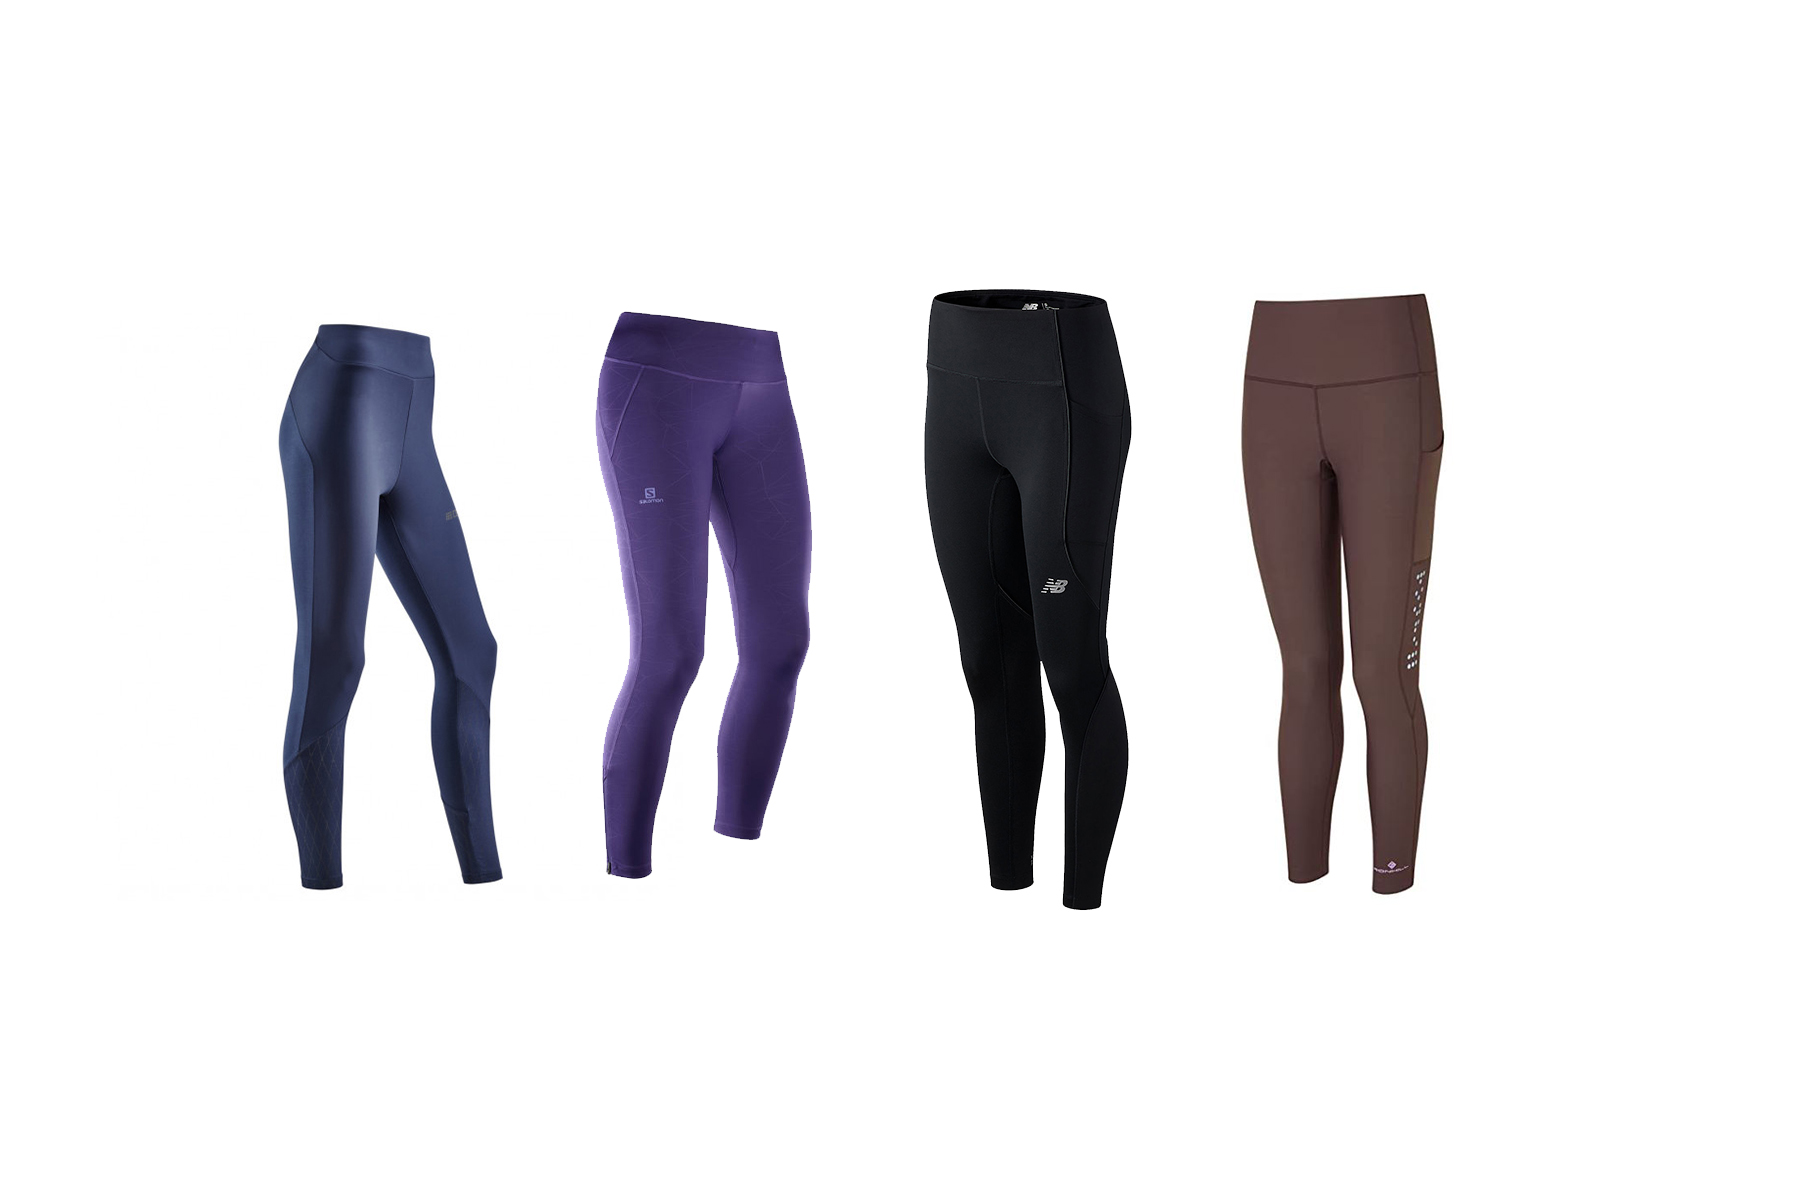 Warm, covering thermal legging